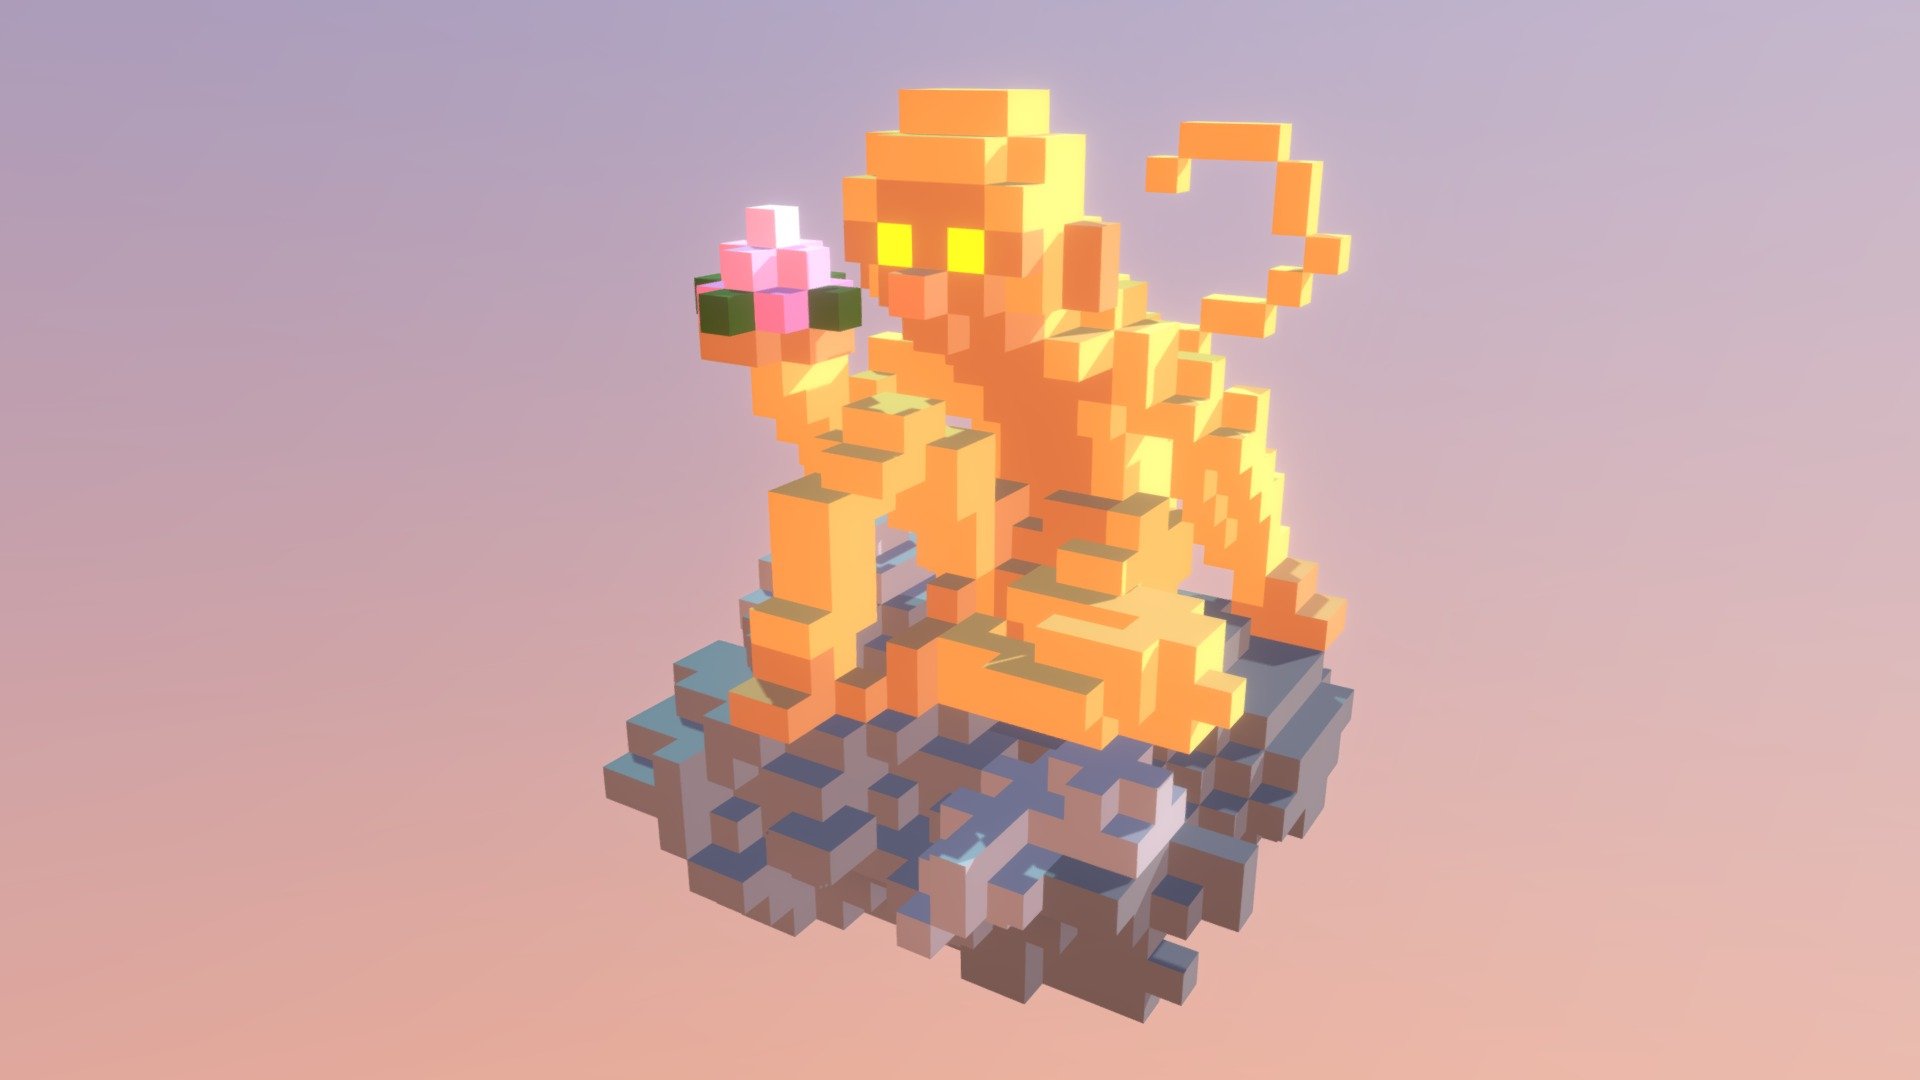 Voxel: Sun Wukong - in the mountains